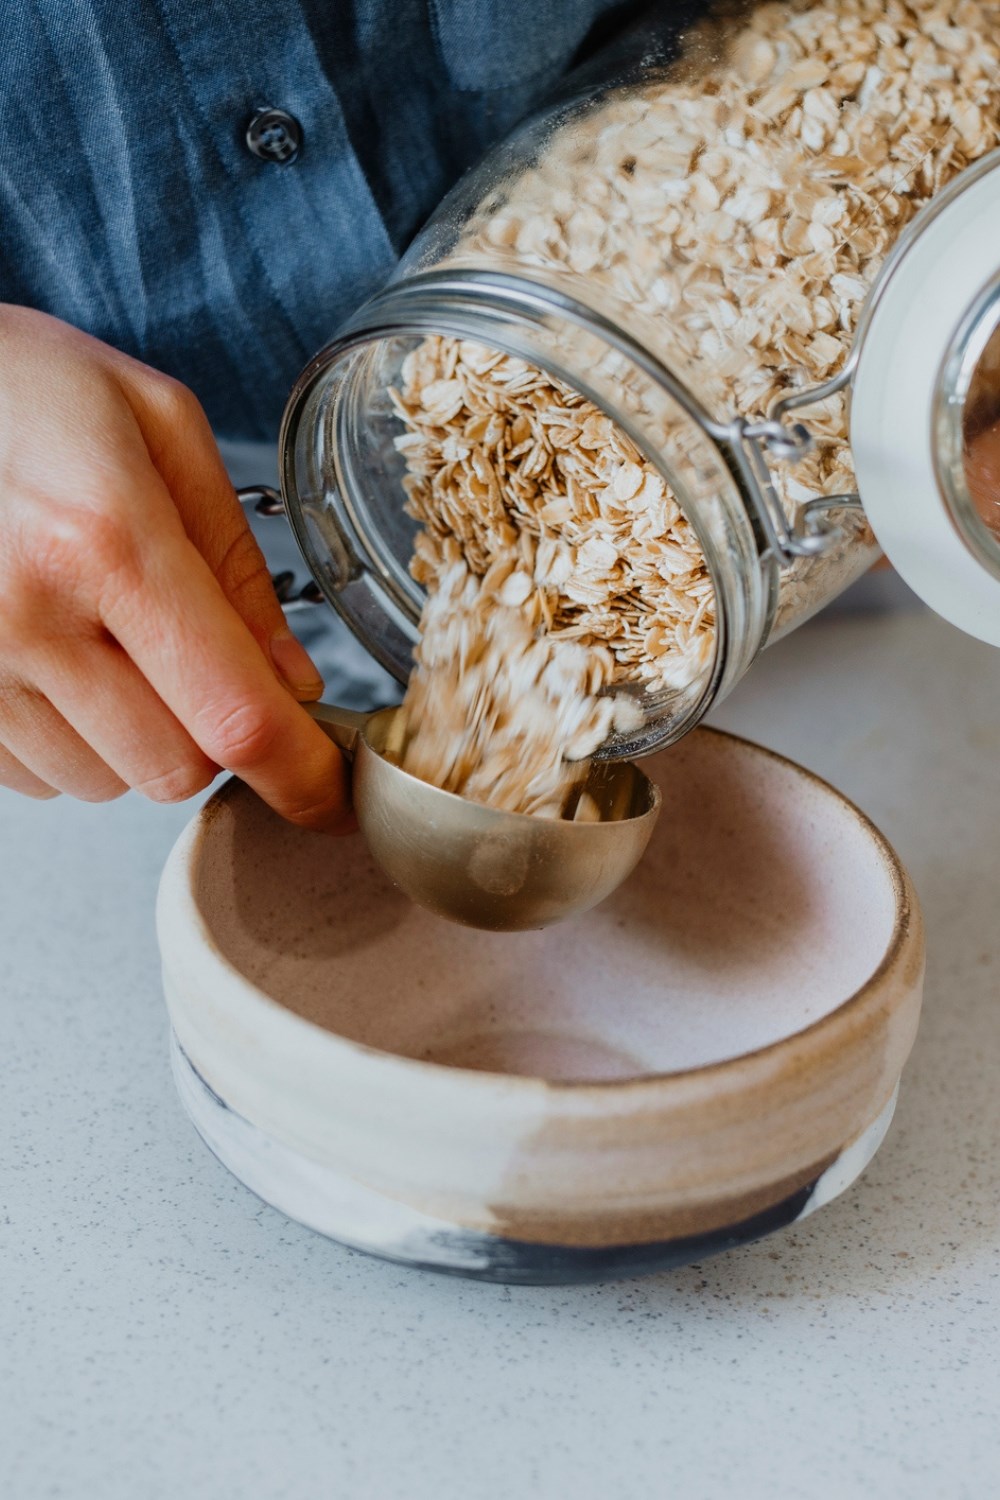 How Long Does It Take For Oats To Go Bad | Better Homes and Gardens